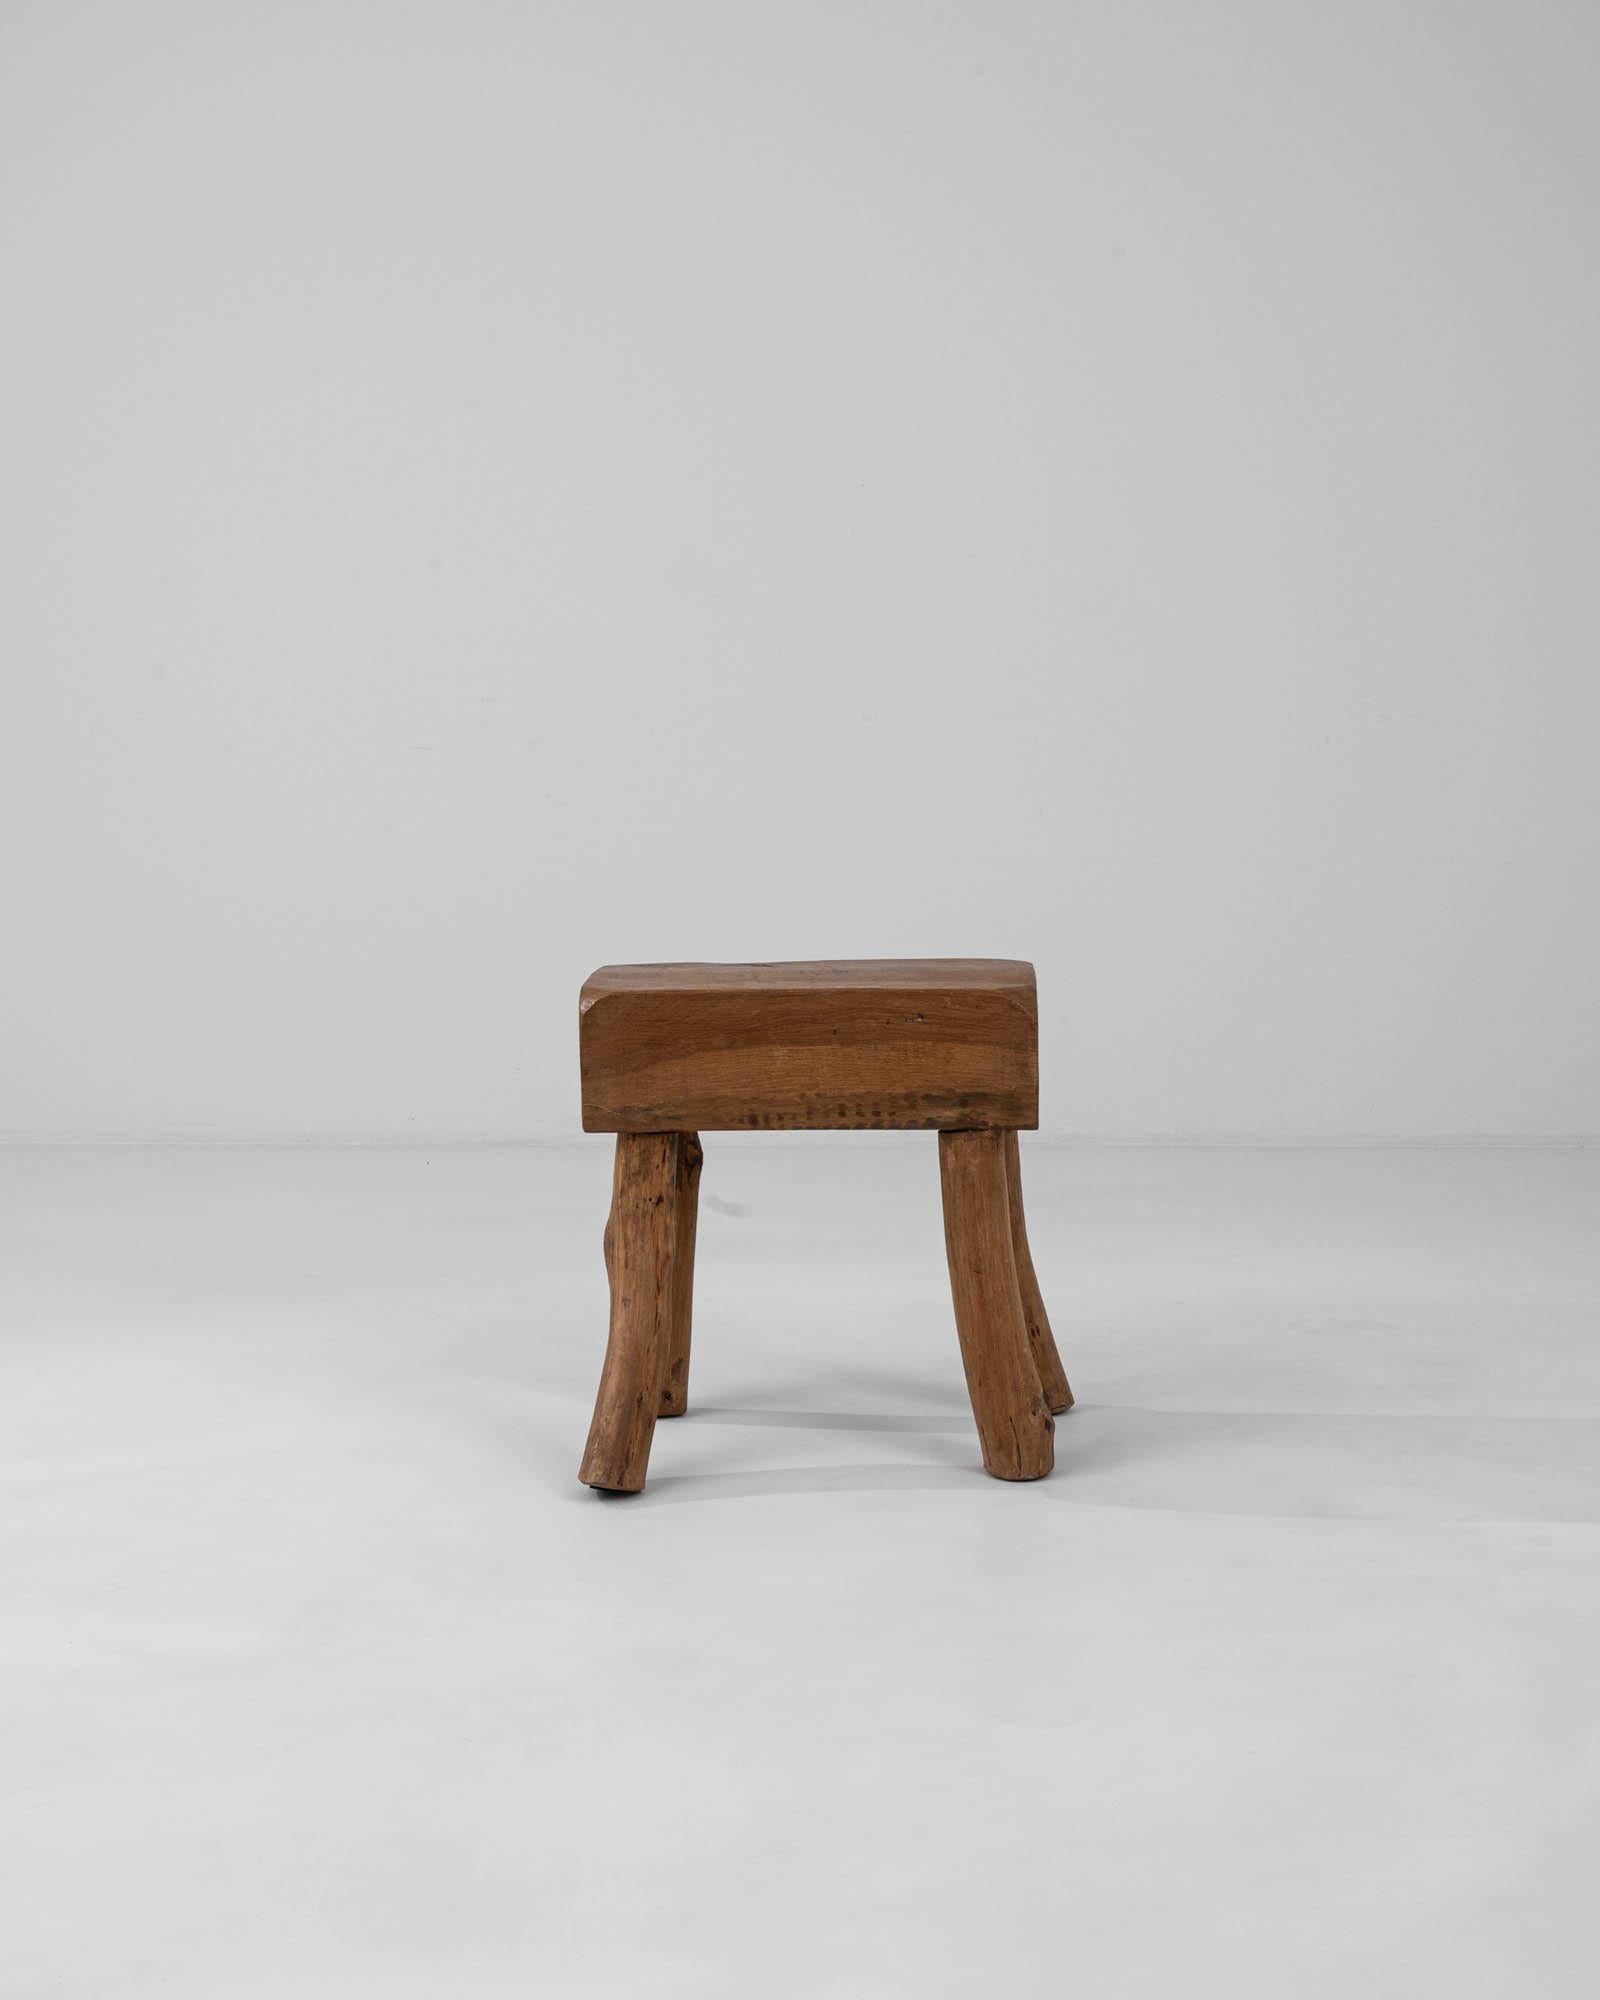 This 20th Century Belgian Wooden Stool exudes a robust and earthy charm, making it a timeless addition to any interior. Crafted from solid wood, the stool showcases natural grain patterns and knots that tell the story of its rustic origins. The